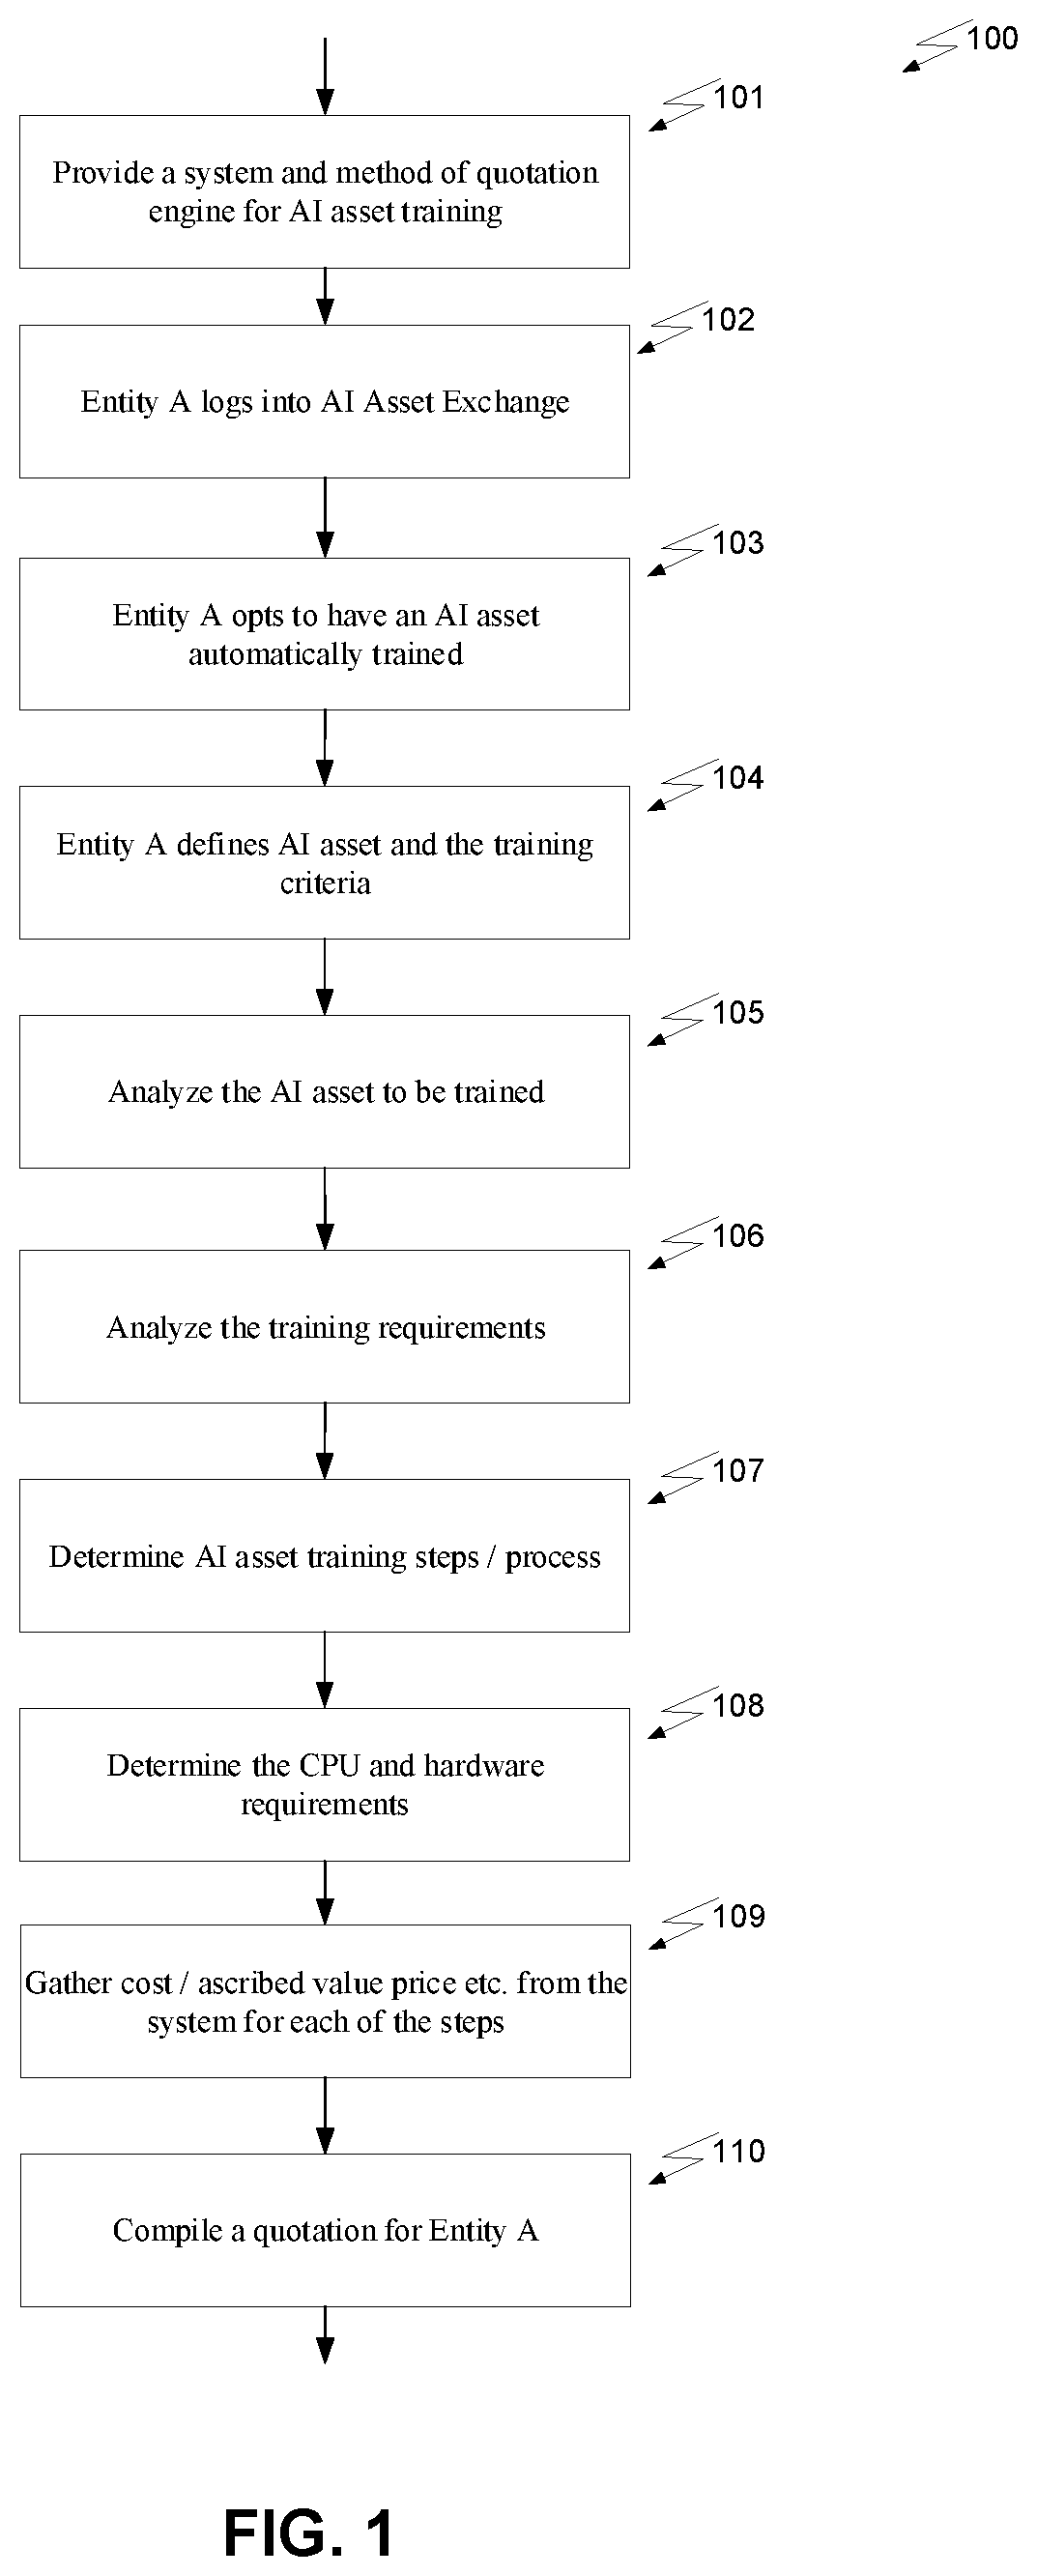 System and Method of Quotation Engine for AI Asset Training